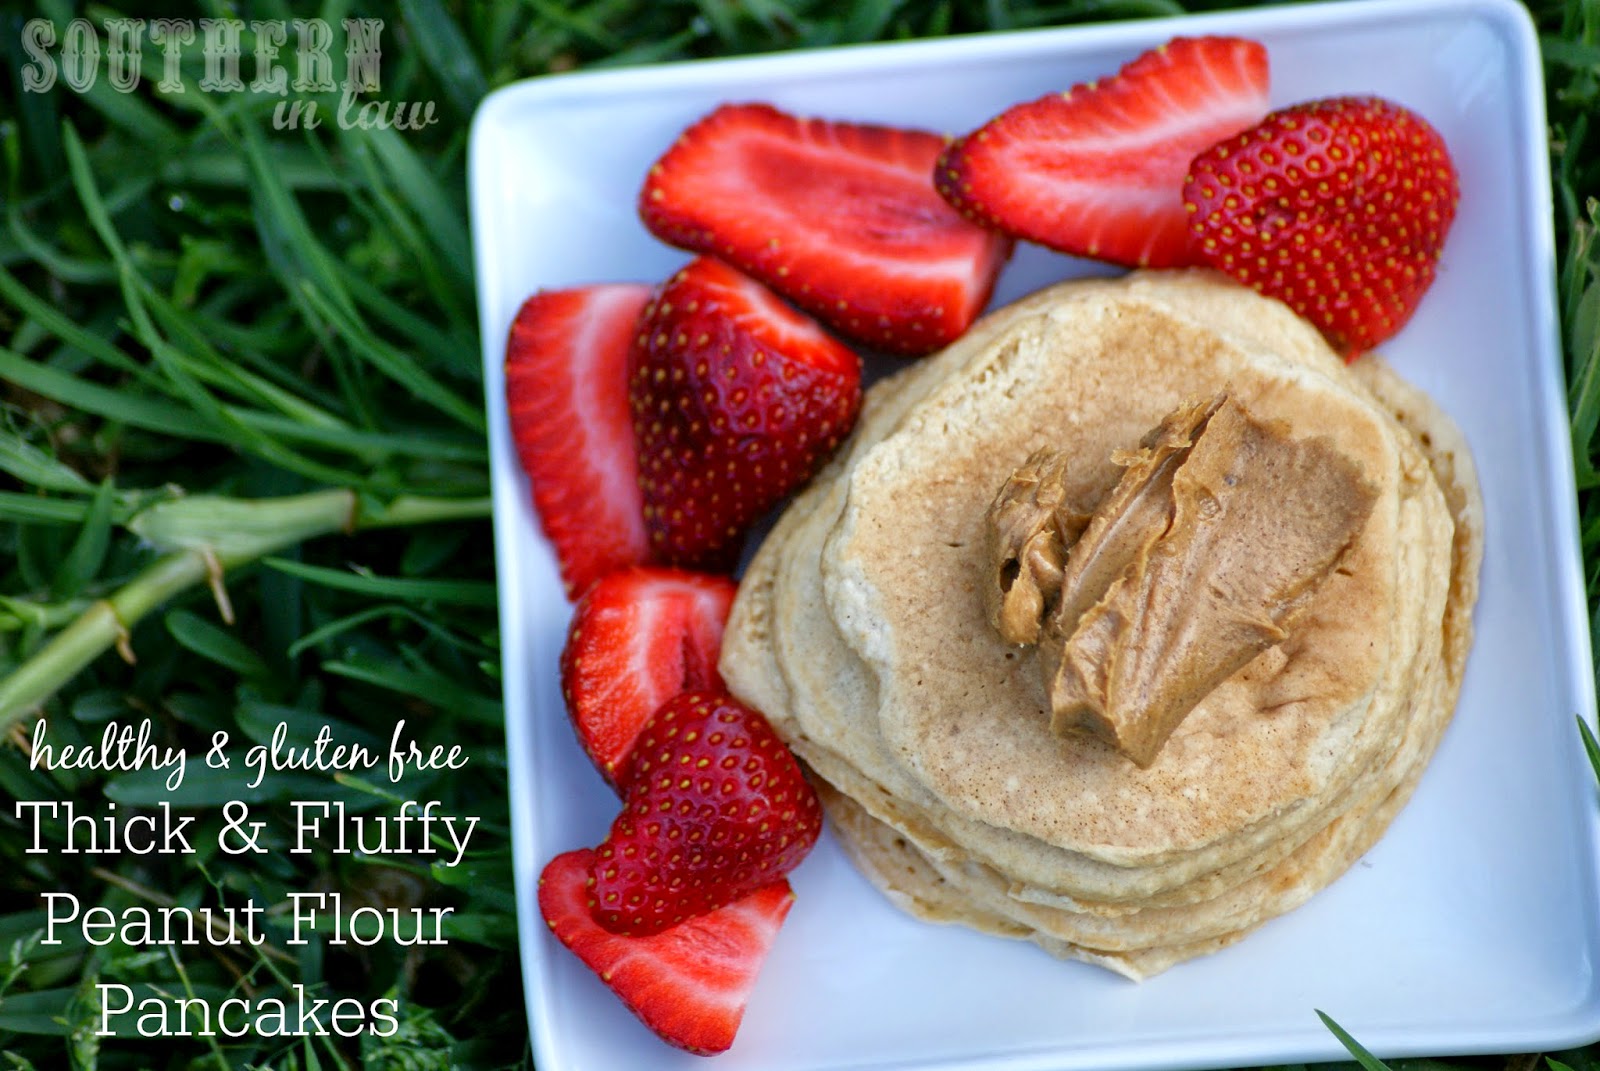 Gluten Free Thick and Fluffy Peanut Flour Pancakes Recipe - low fat, gluten free, refined sugar free, peanut flour recipes, healthy pancake recipes, high protein